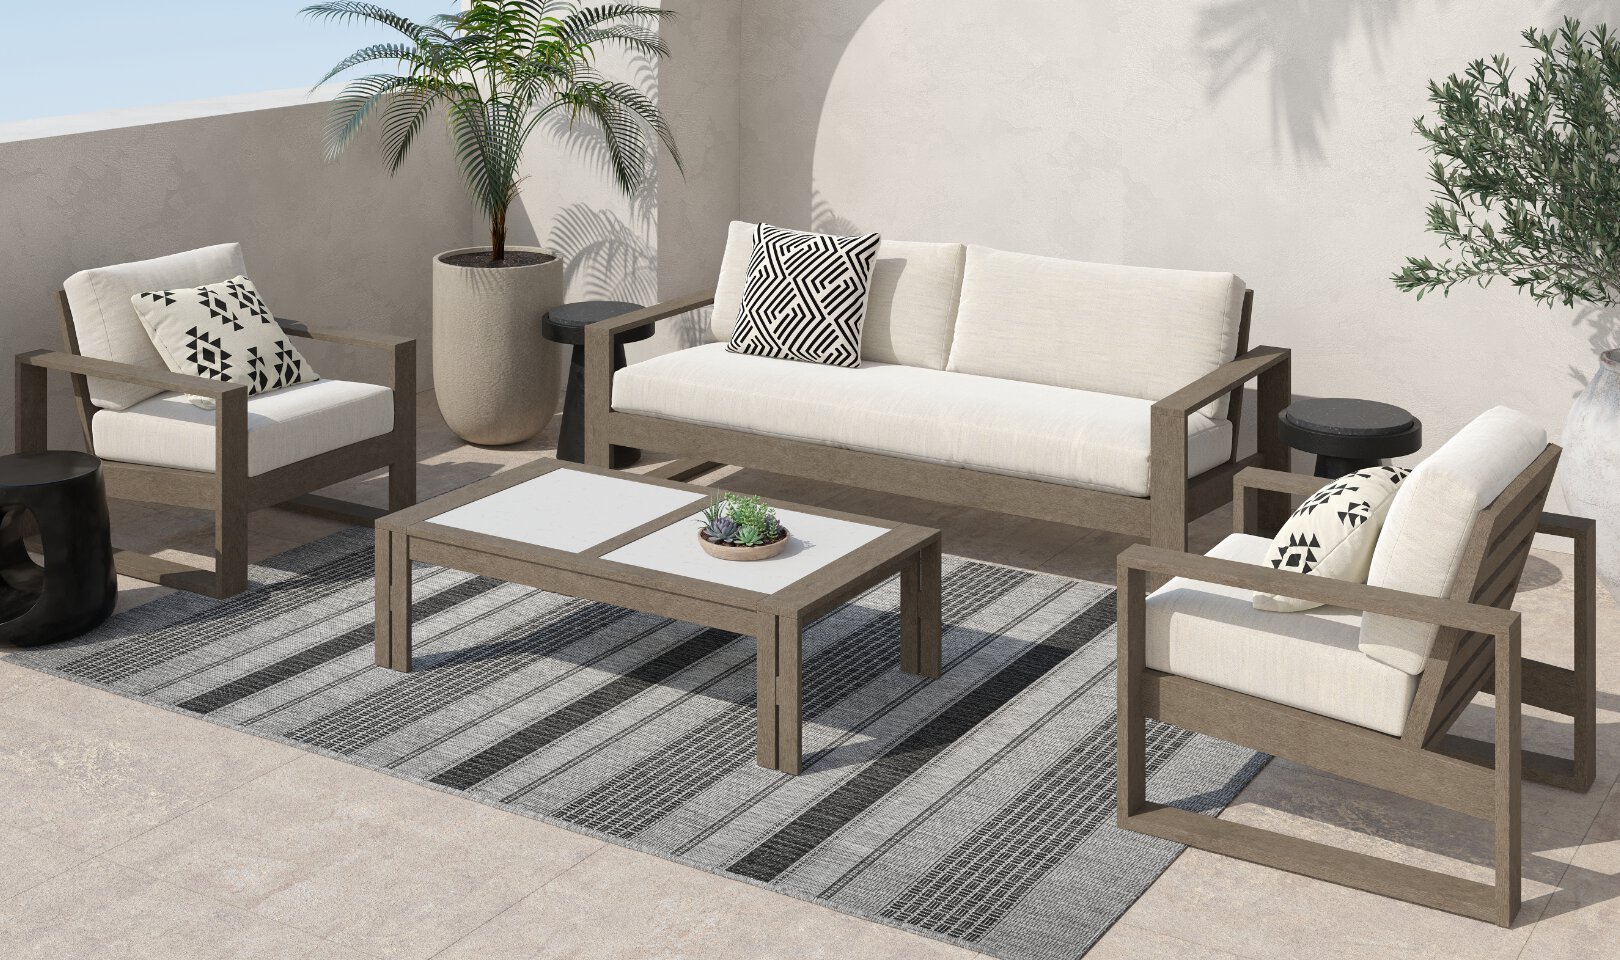 Laguna Outdoor Set with Sofa, Coffee Table and Two Lounge Chairs